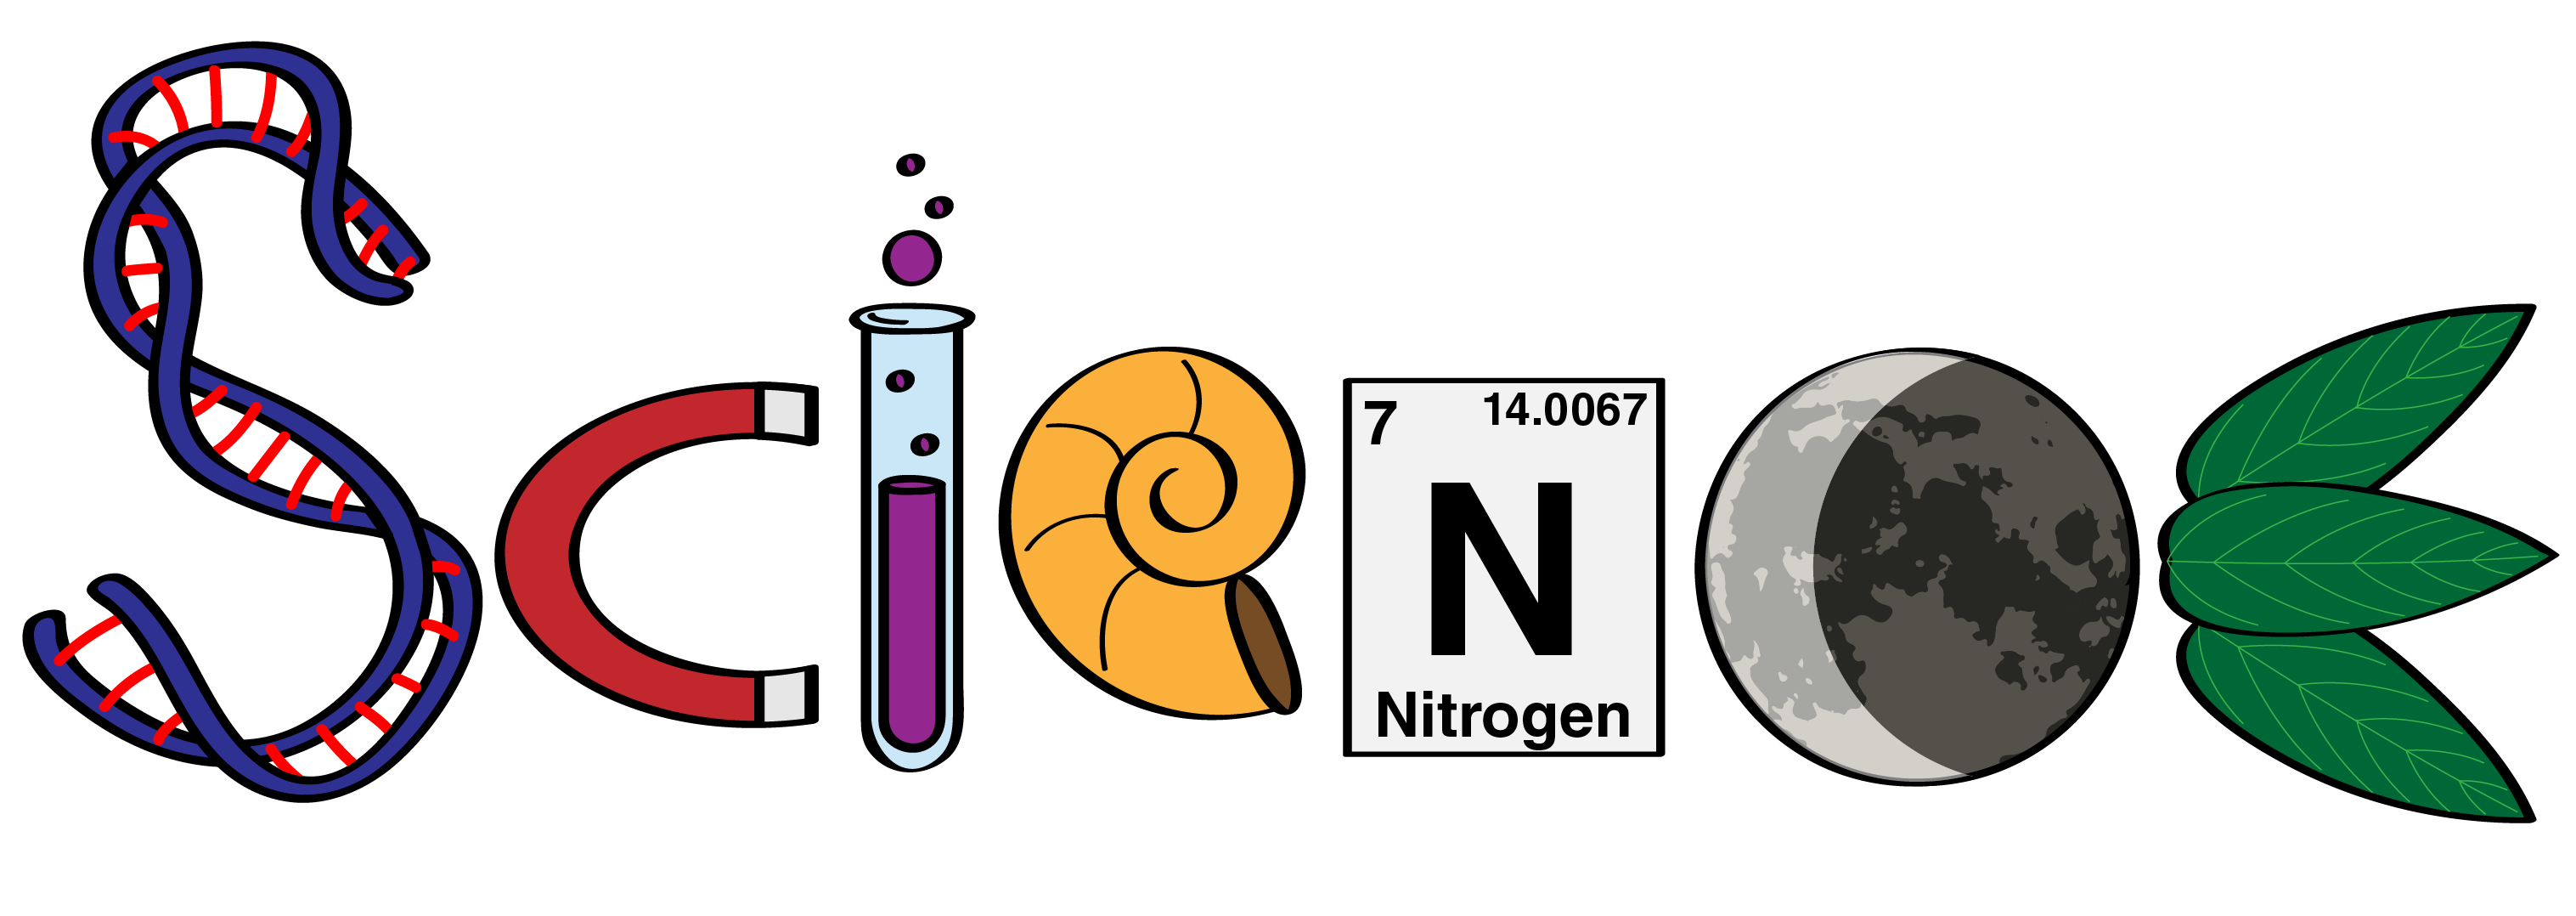 File:P Science.png